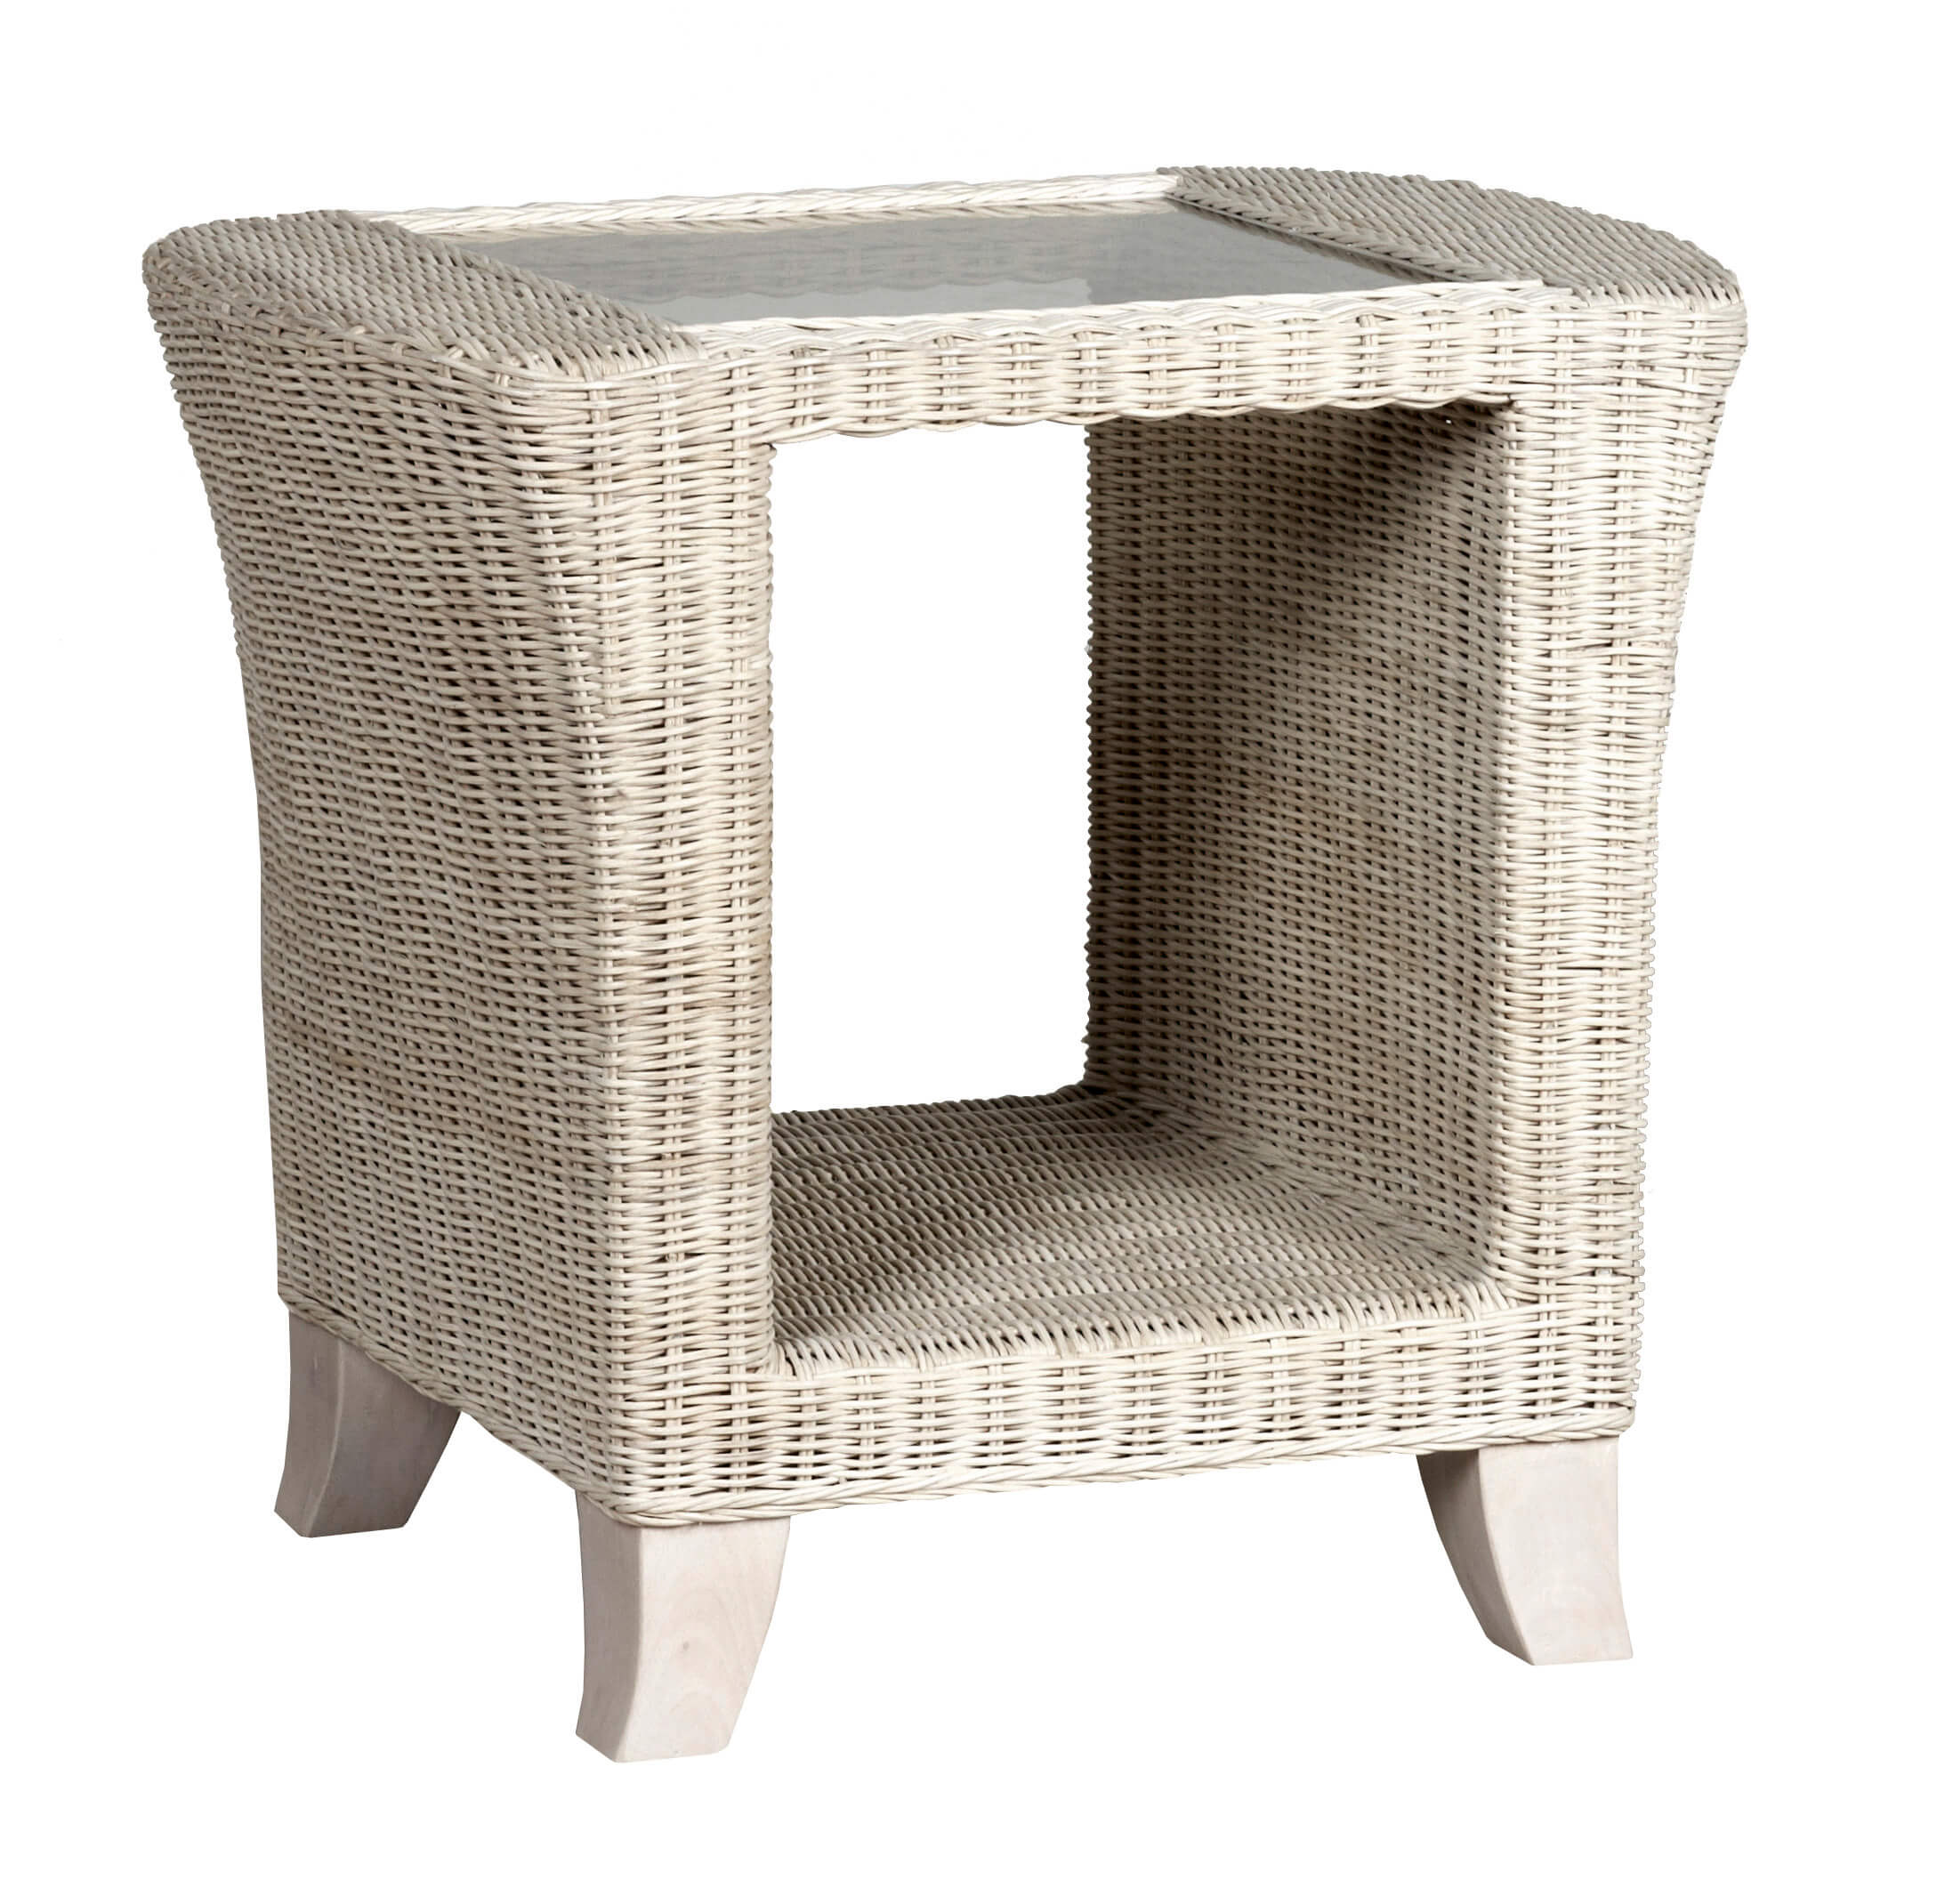 Showing image for Arona side table